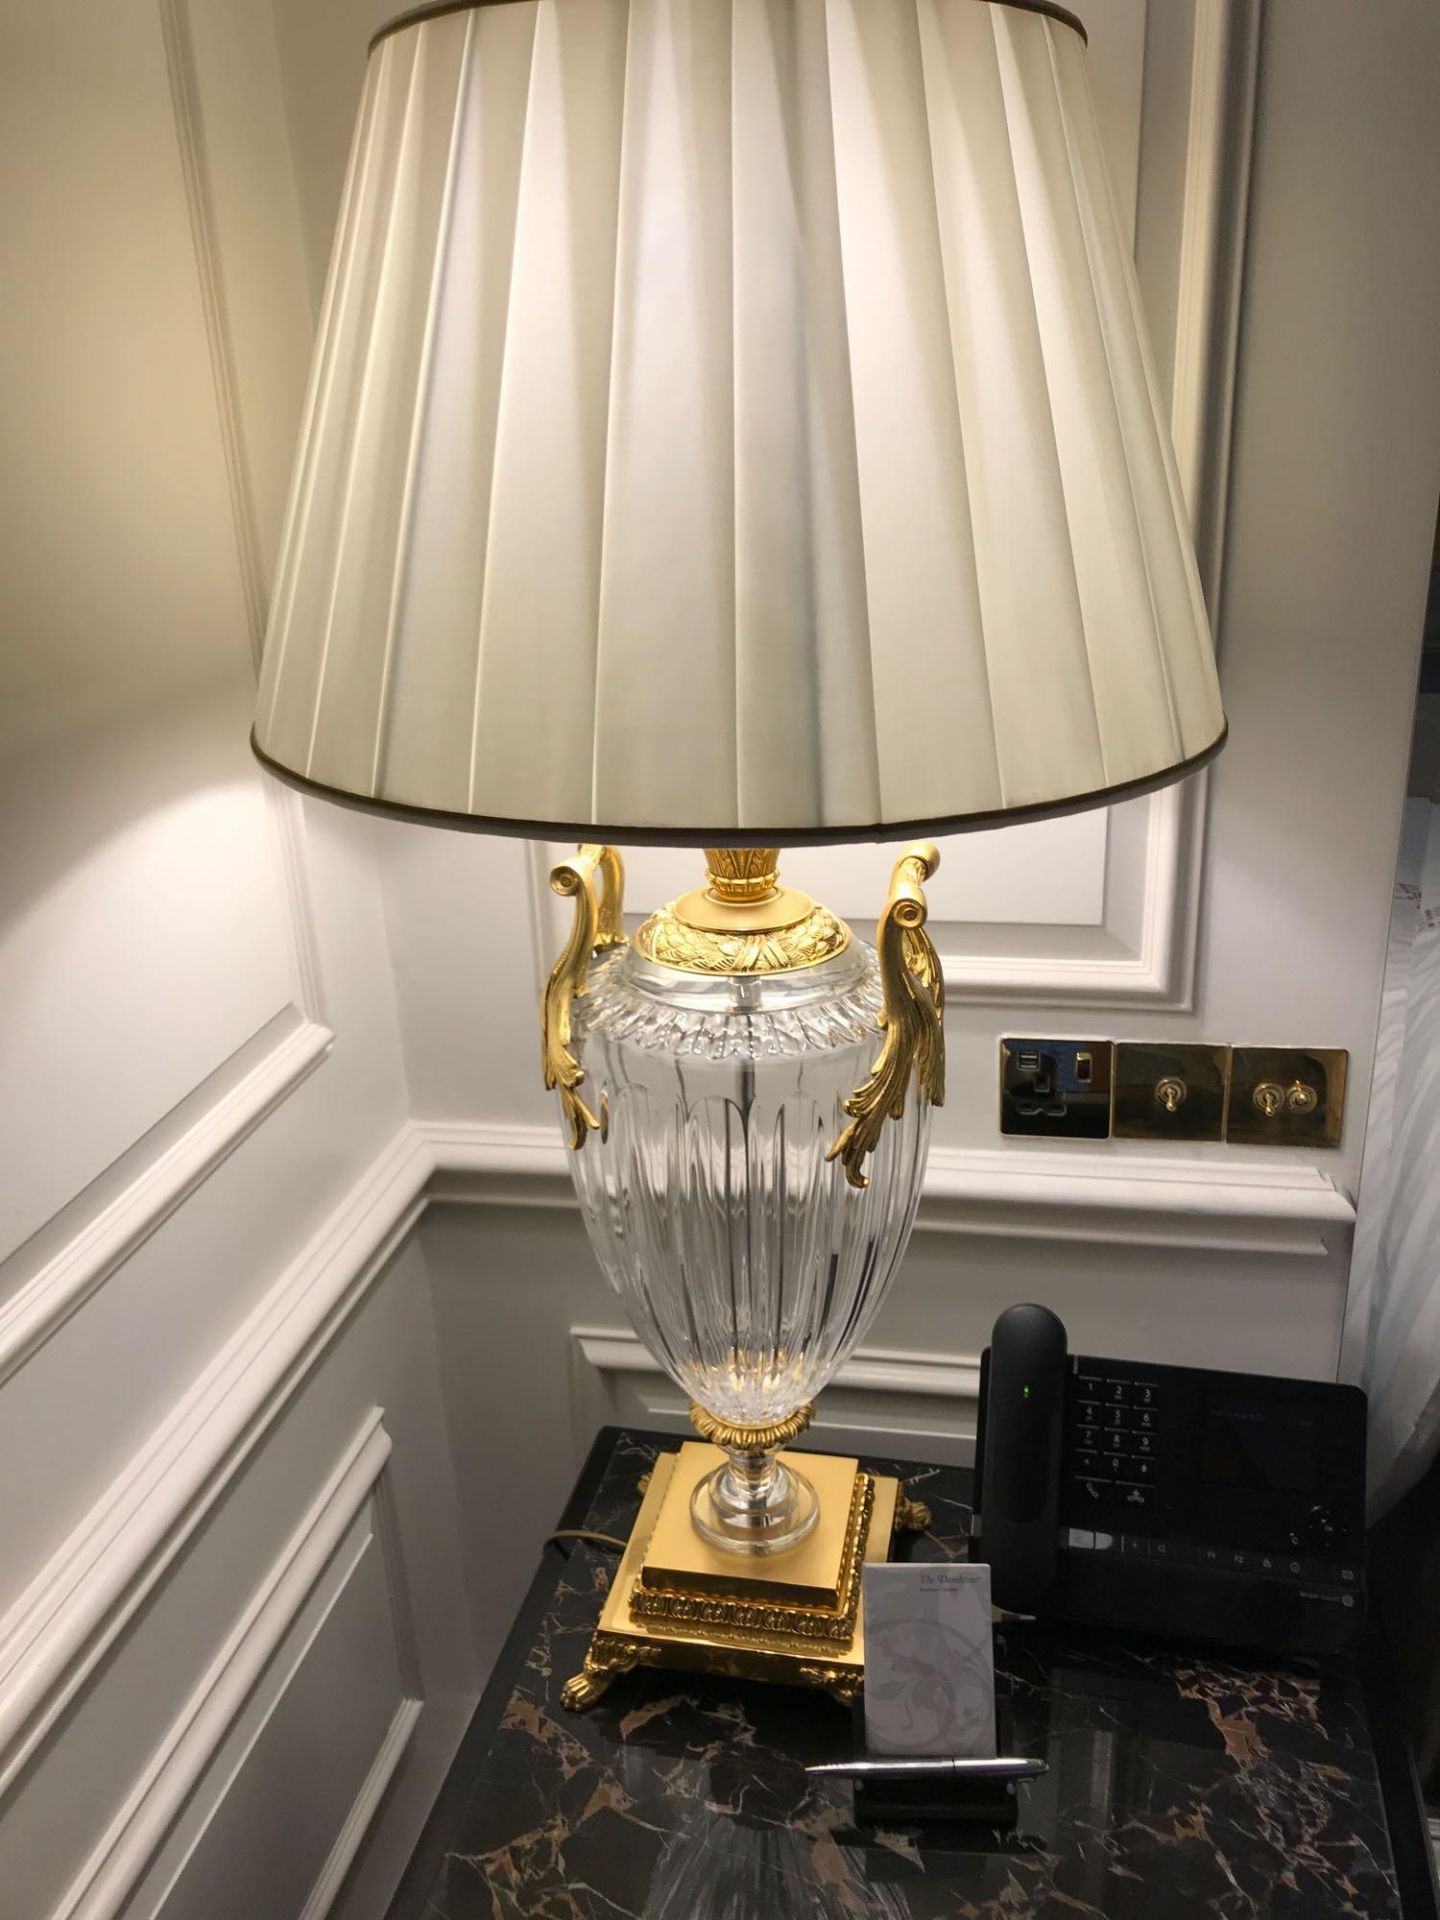 A Pair Of Laudarte Crystal Table Lamps Inserts And Decorations In 24ct Gold With Shade 95cm Tall